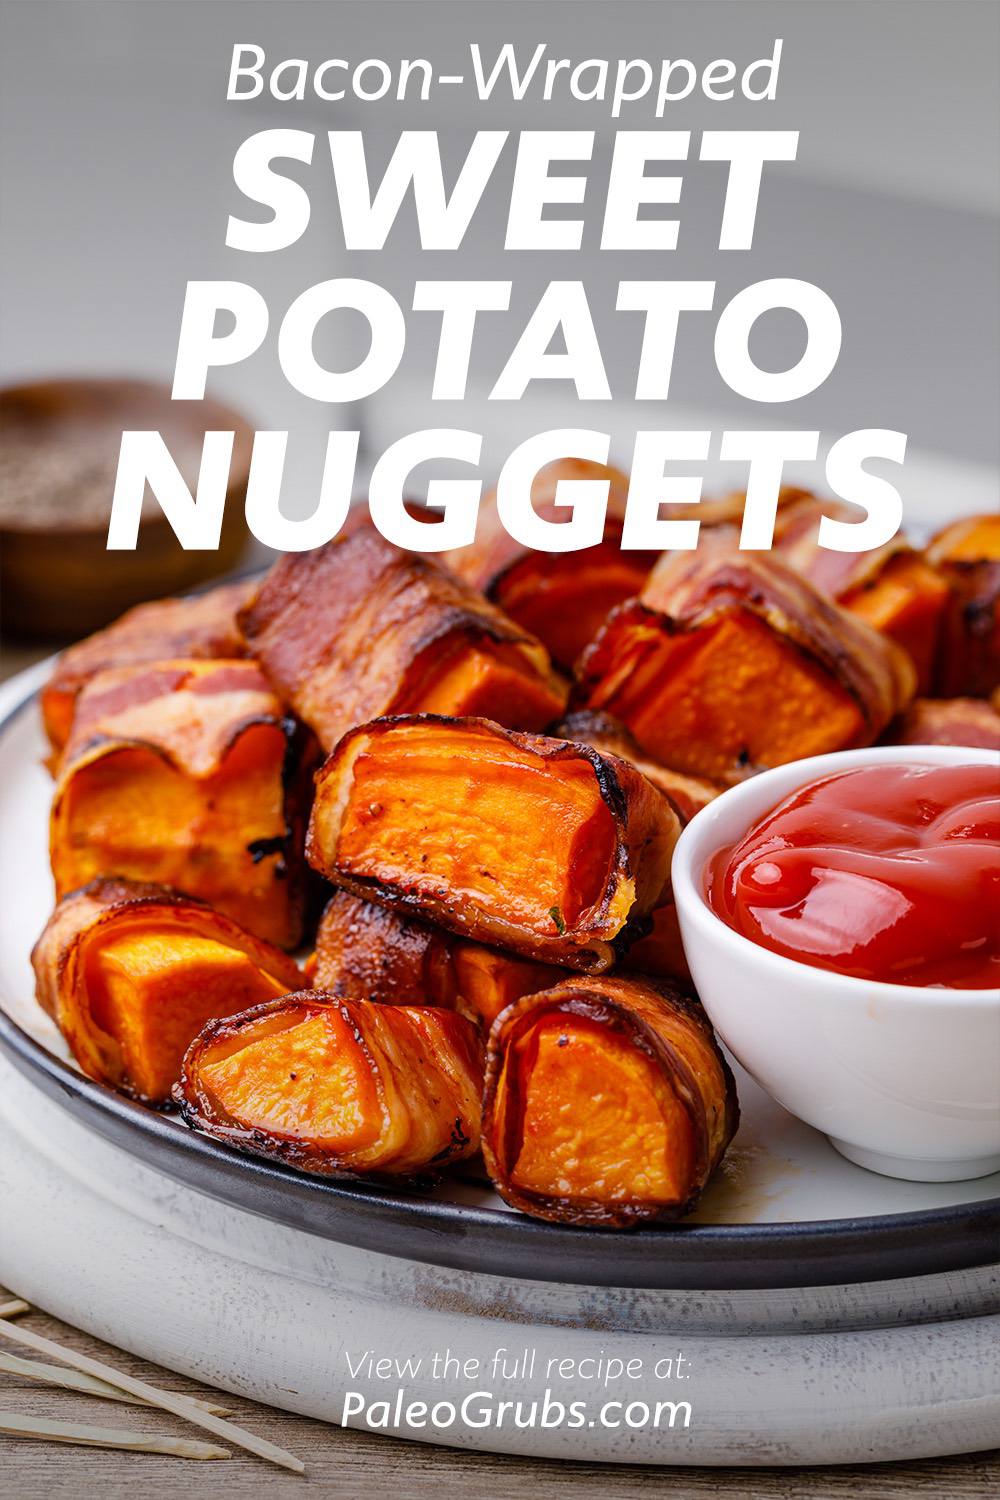 Bacon-Wrapped Sweet Potato Nuggets with Spicy Ketchup